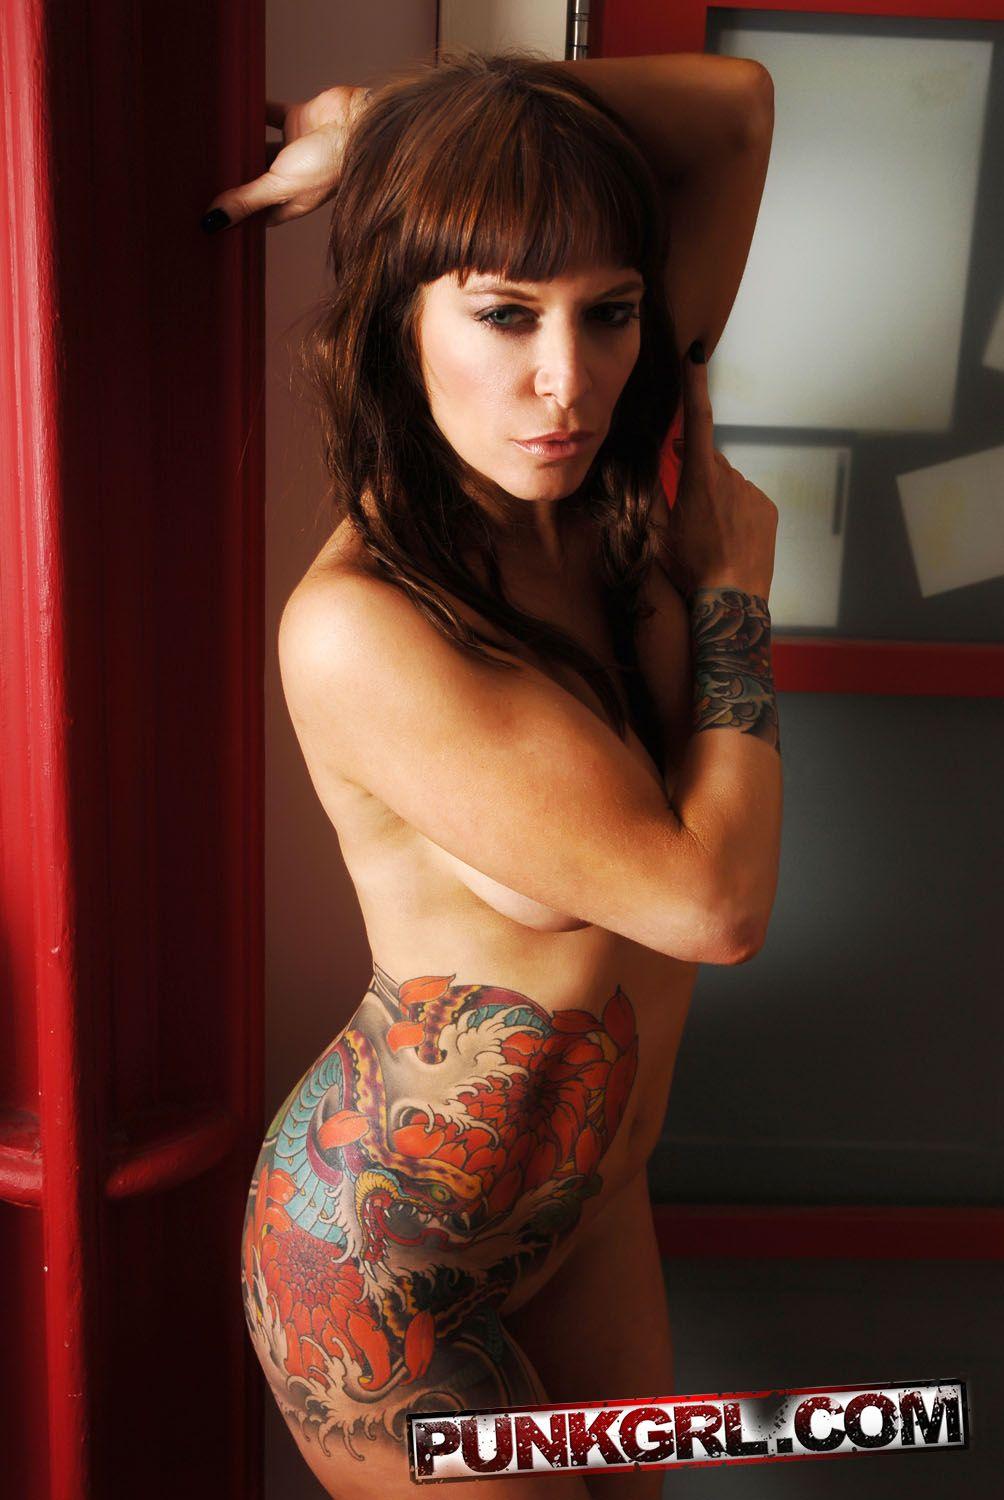 Pictures of tattooed princess Emma J showing her naked body #60762146